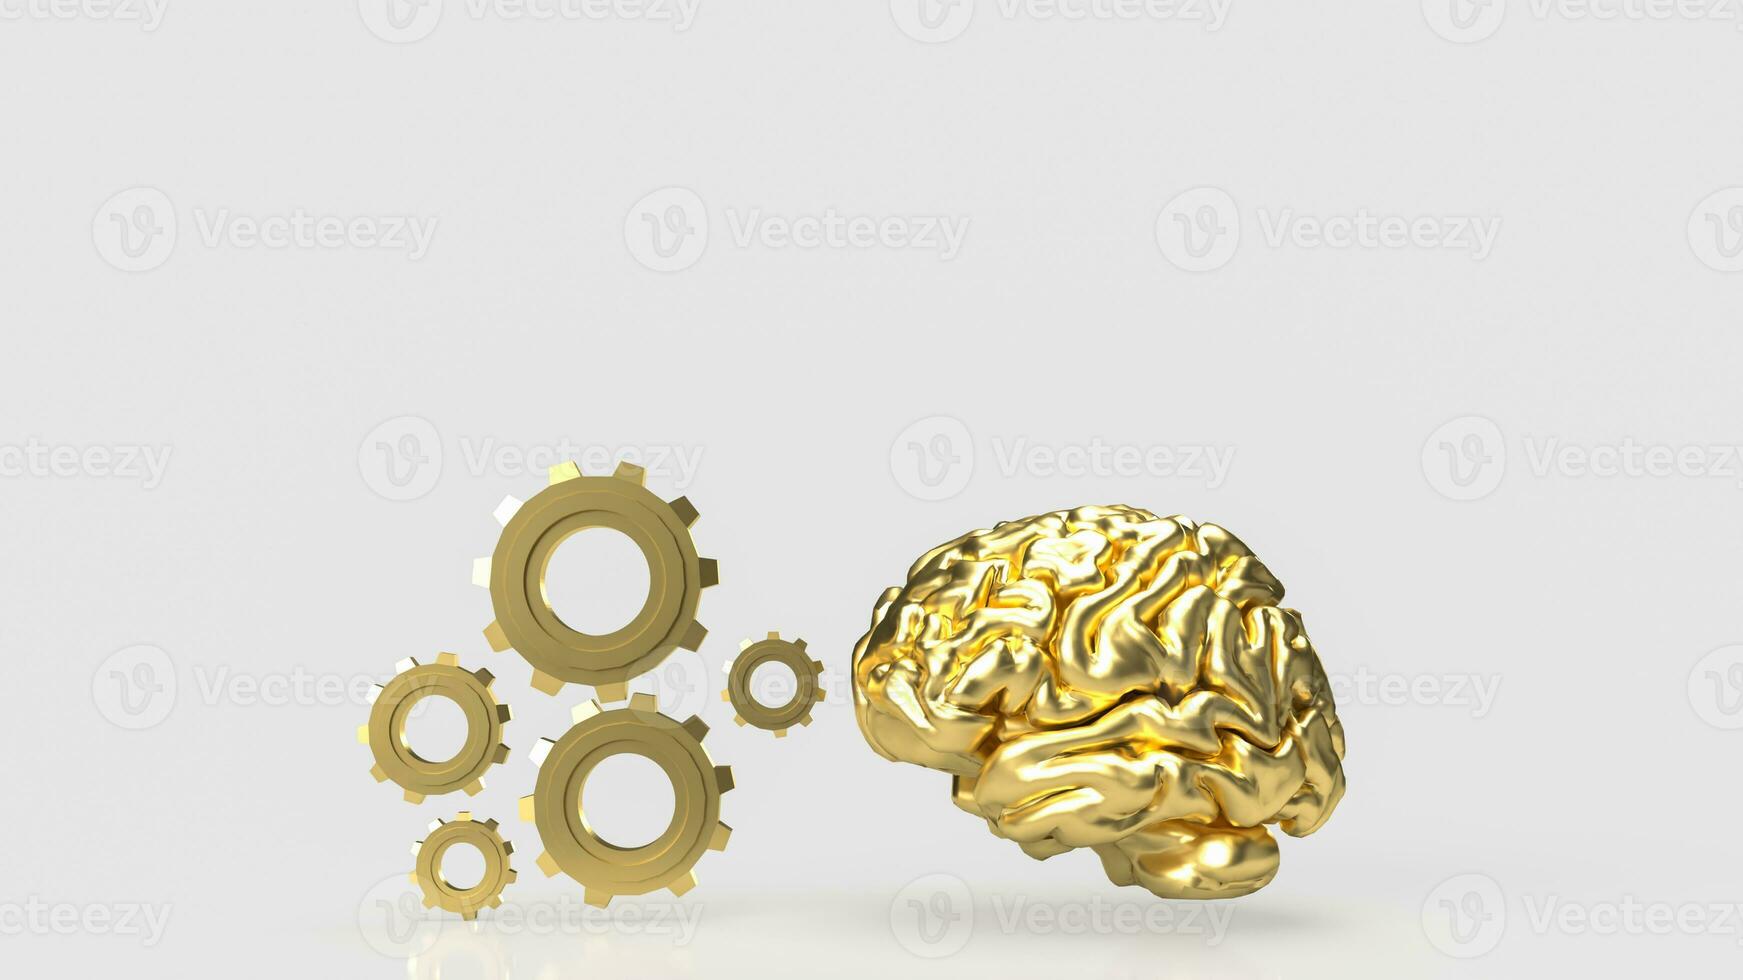 The Brain and gears on white background 3d rendering photo